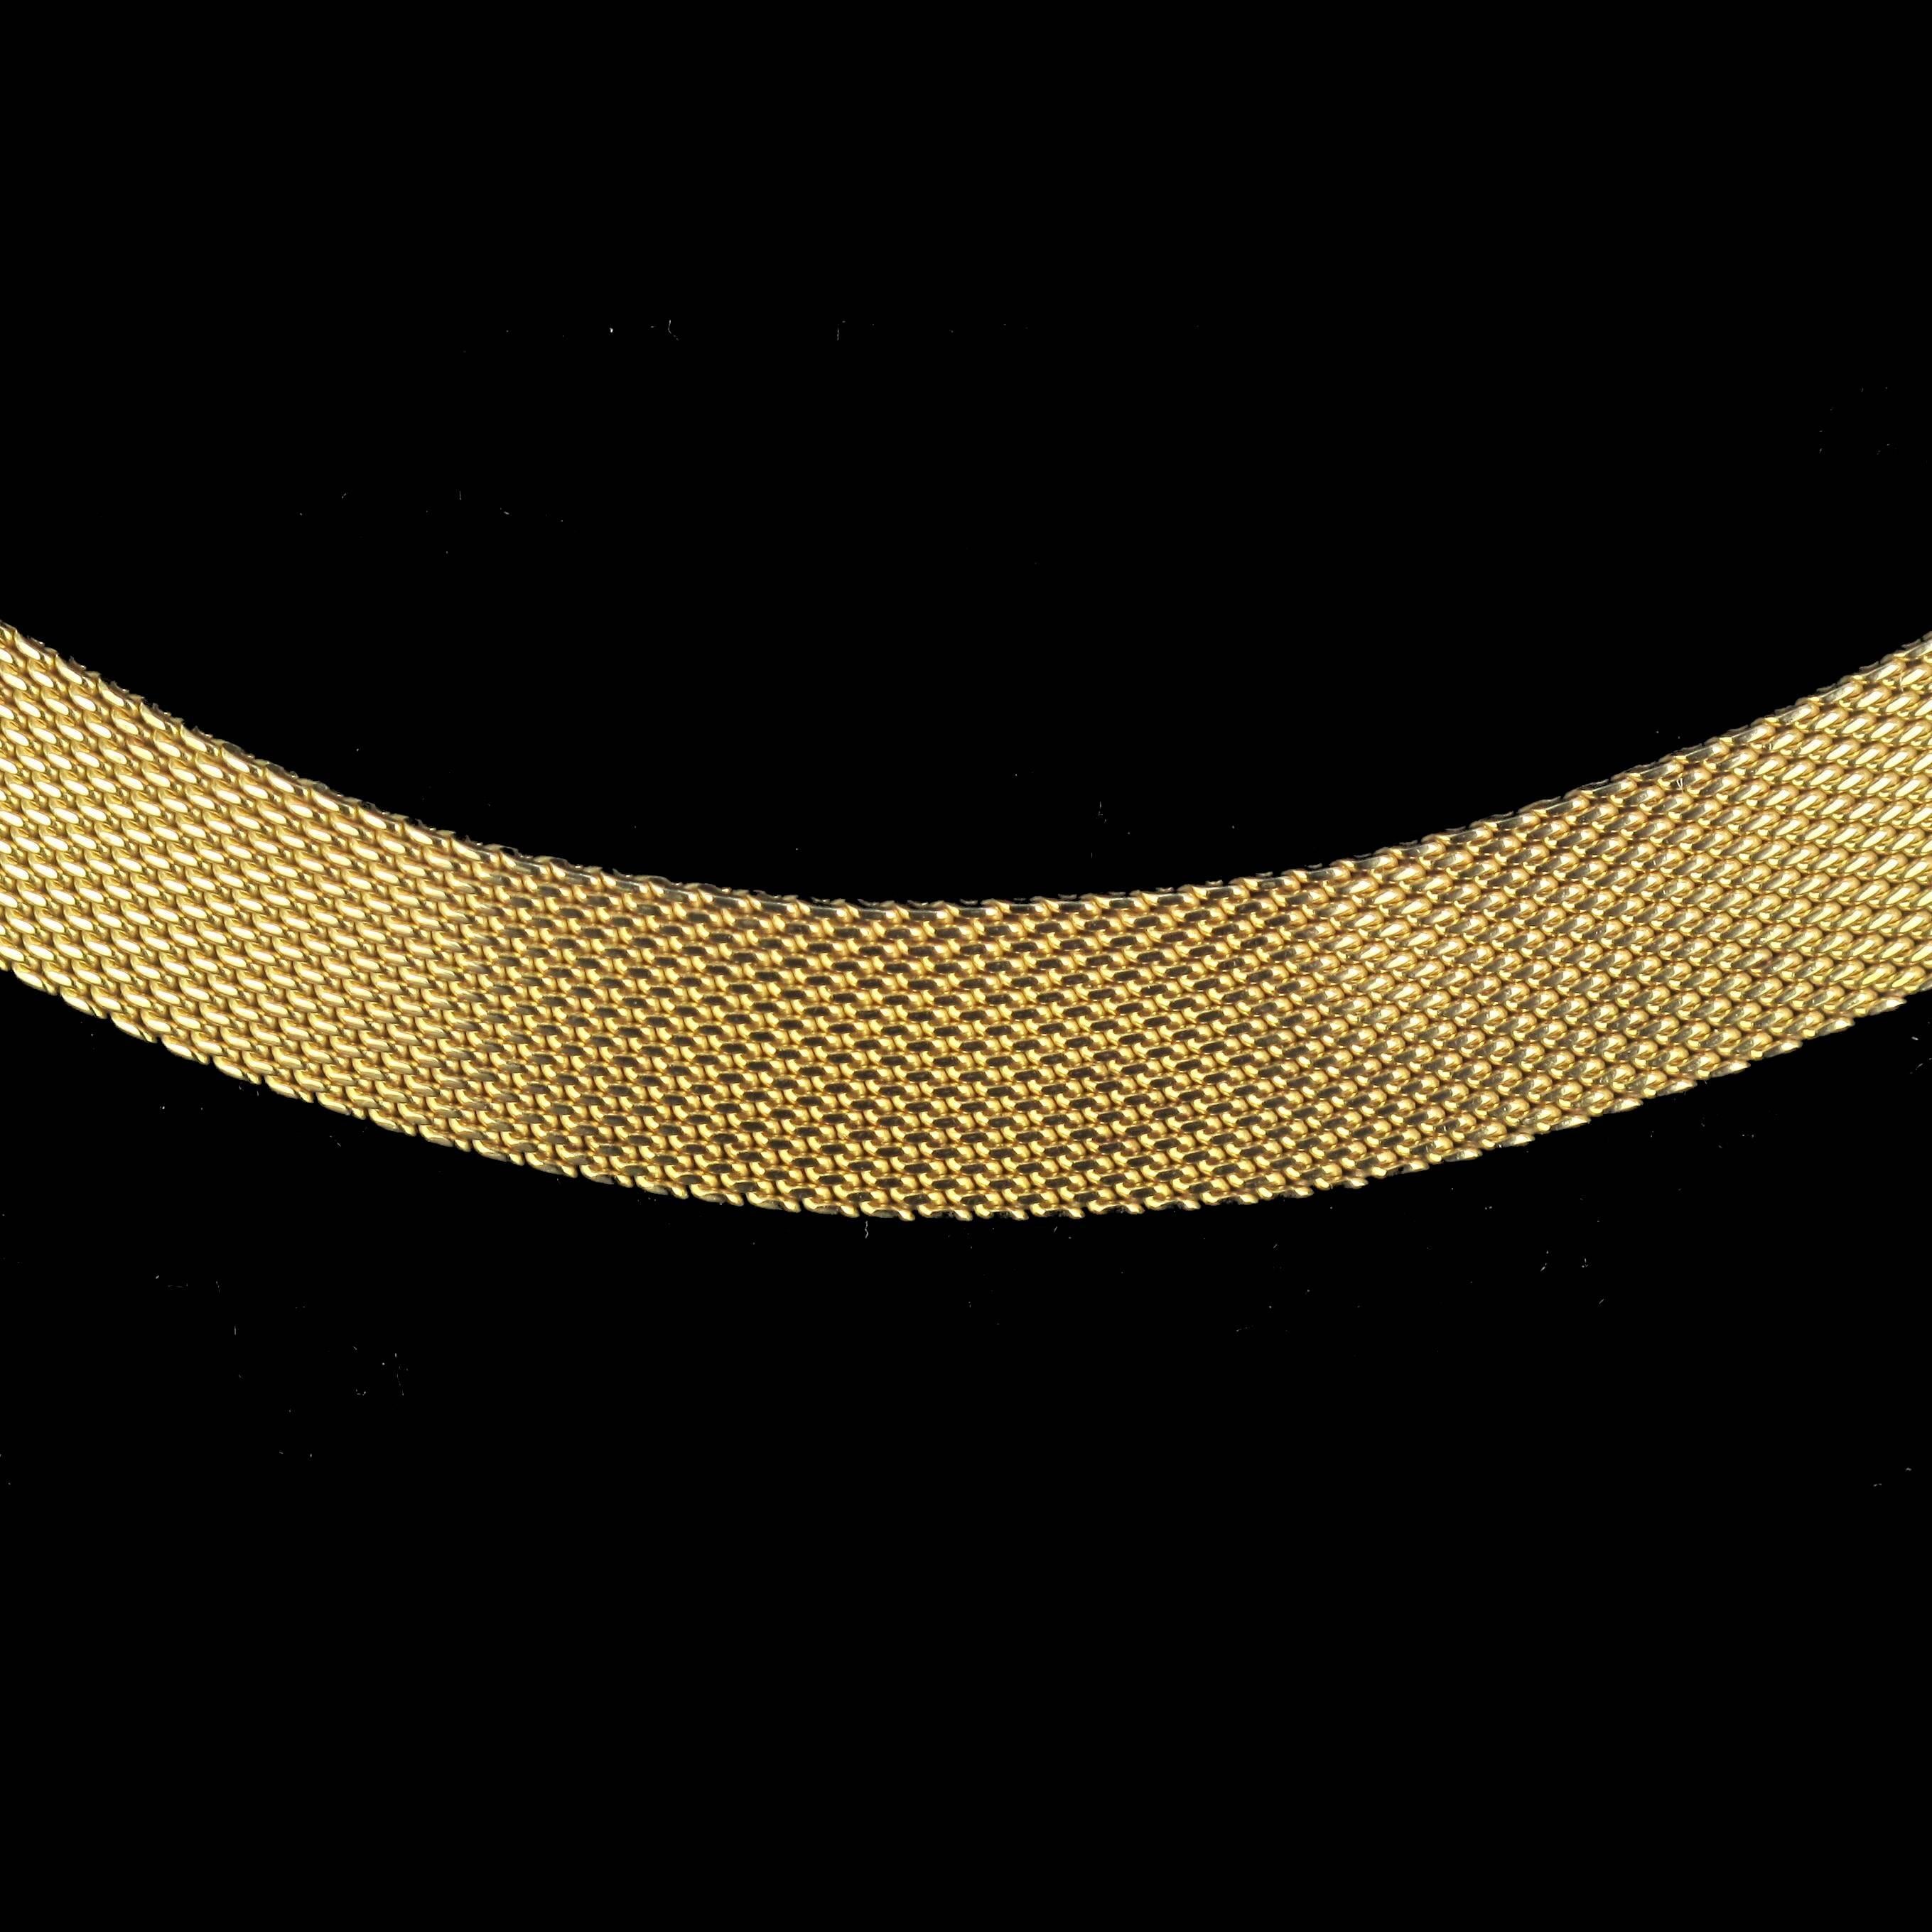 Necklace in 18 carat yellow gold.
This splendid vintage necklace could be described as perfection incarnate. It sits on the neckline gracefully and elegantly. This flat antique necklace is composed of a tight mesh of golden strands. The clasp is a